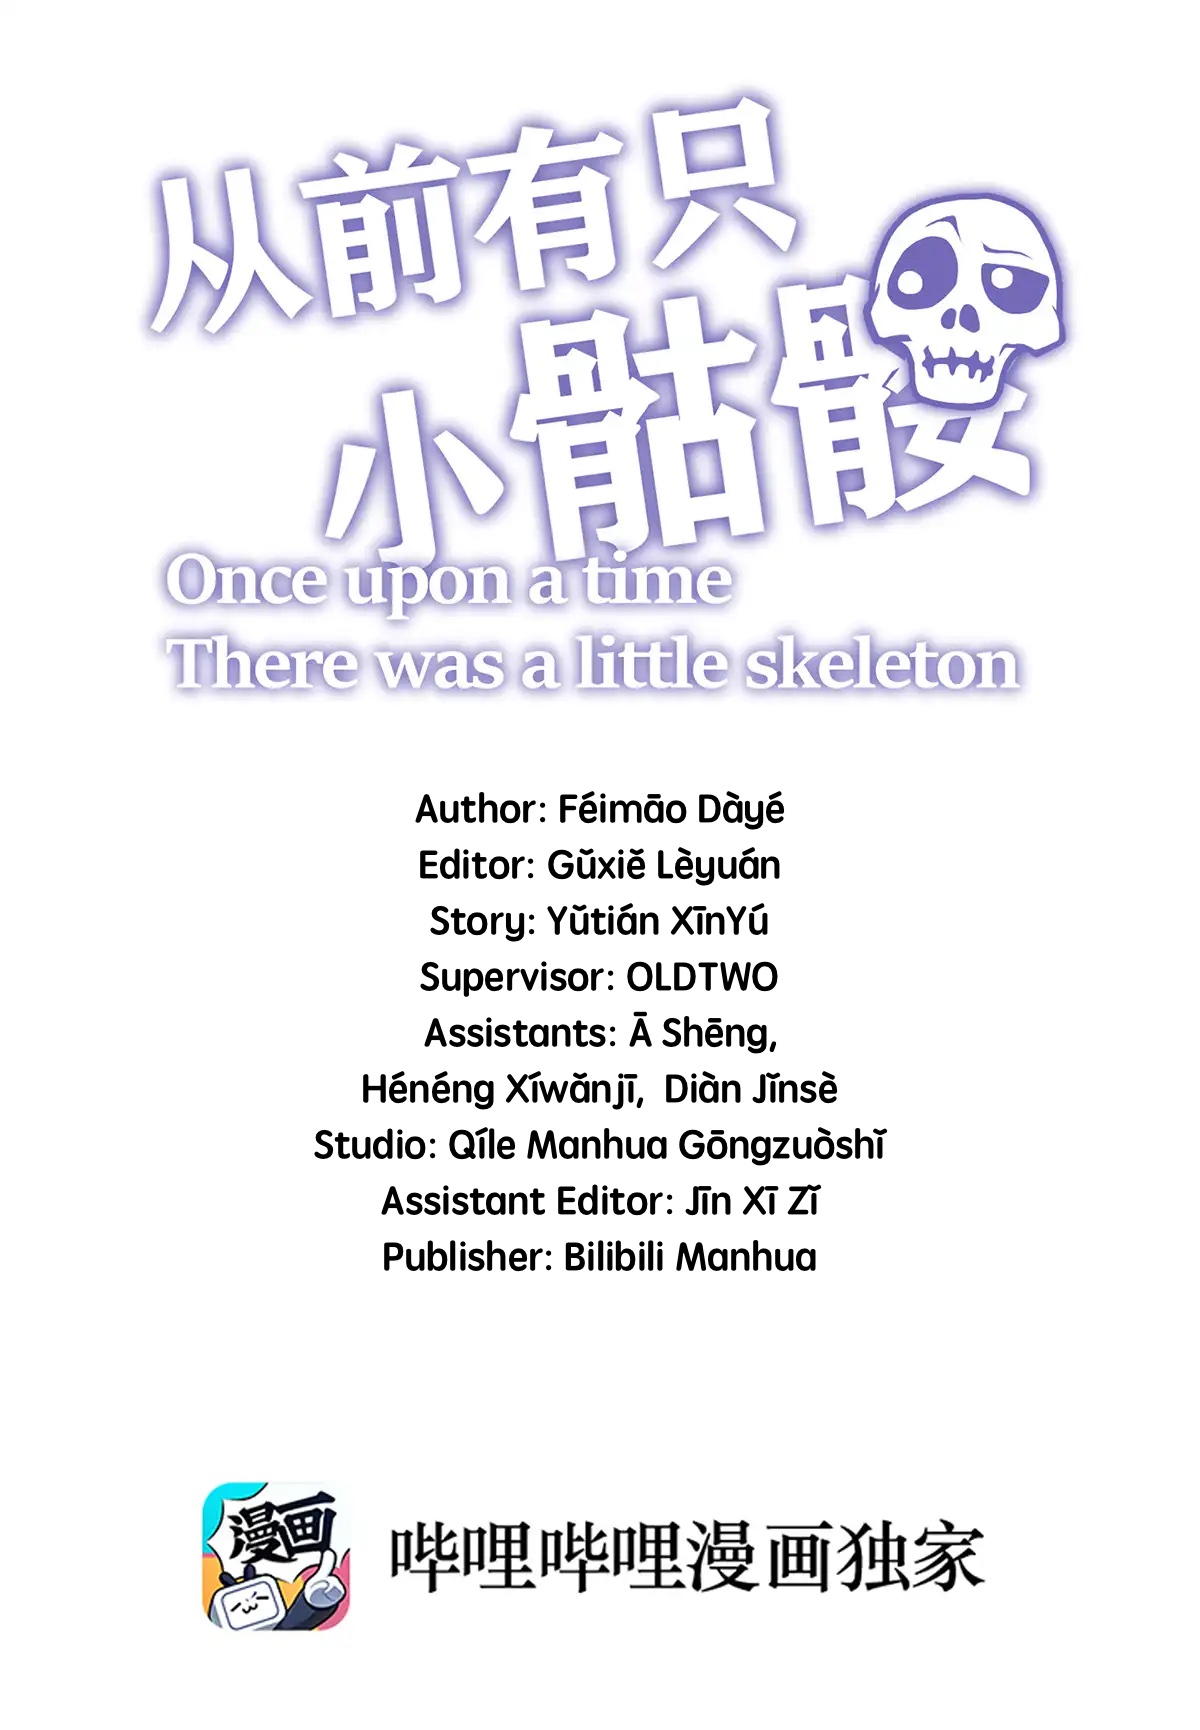 Little Skeleton Ch. 9 Am I pretending to be too much?